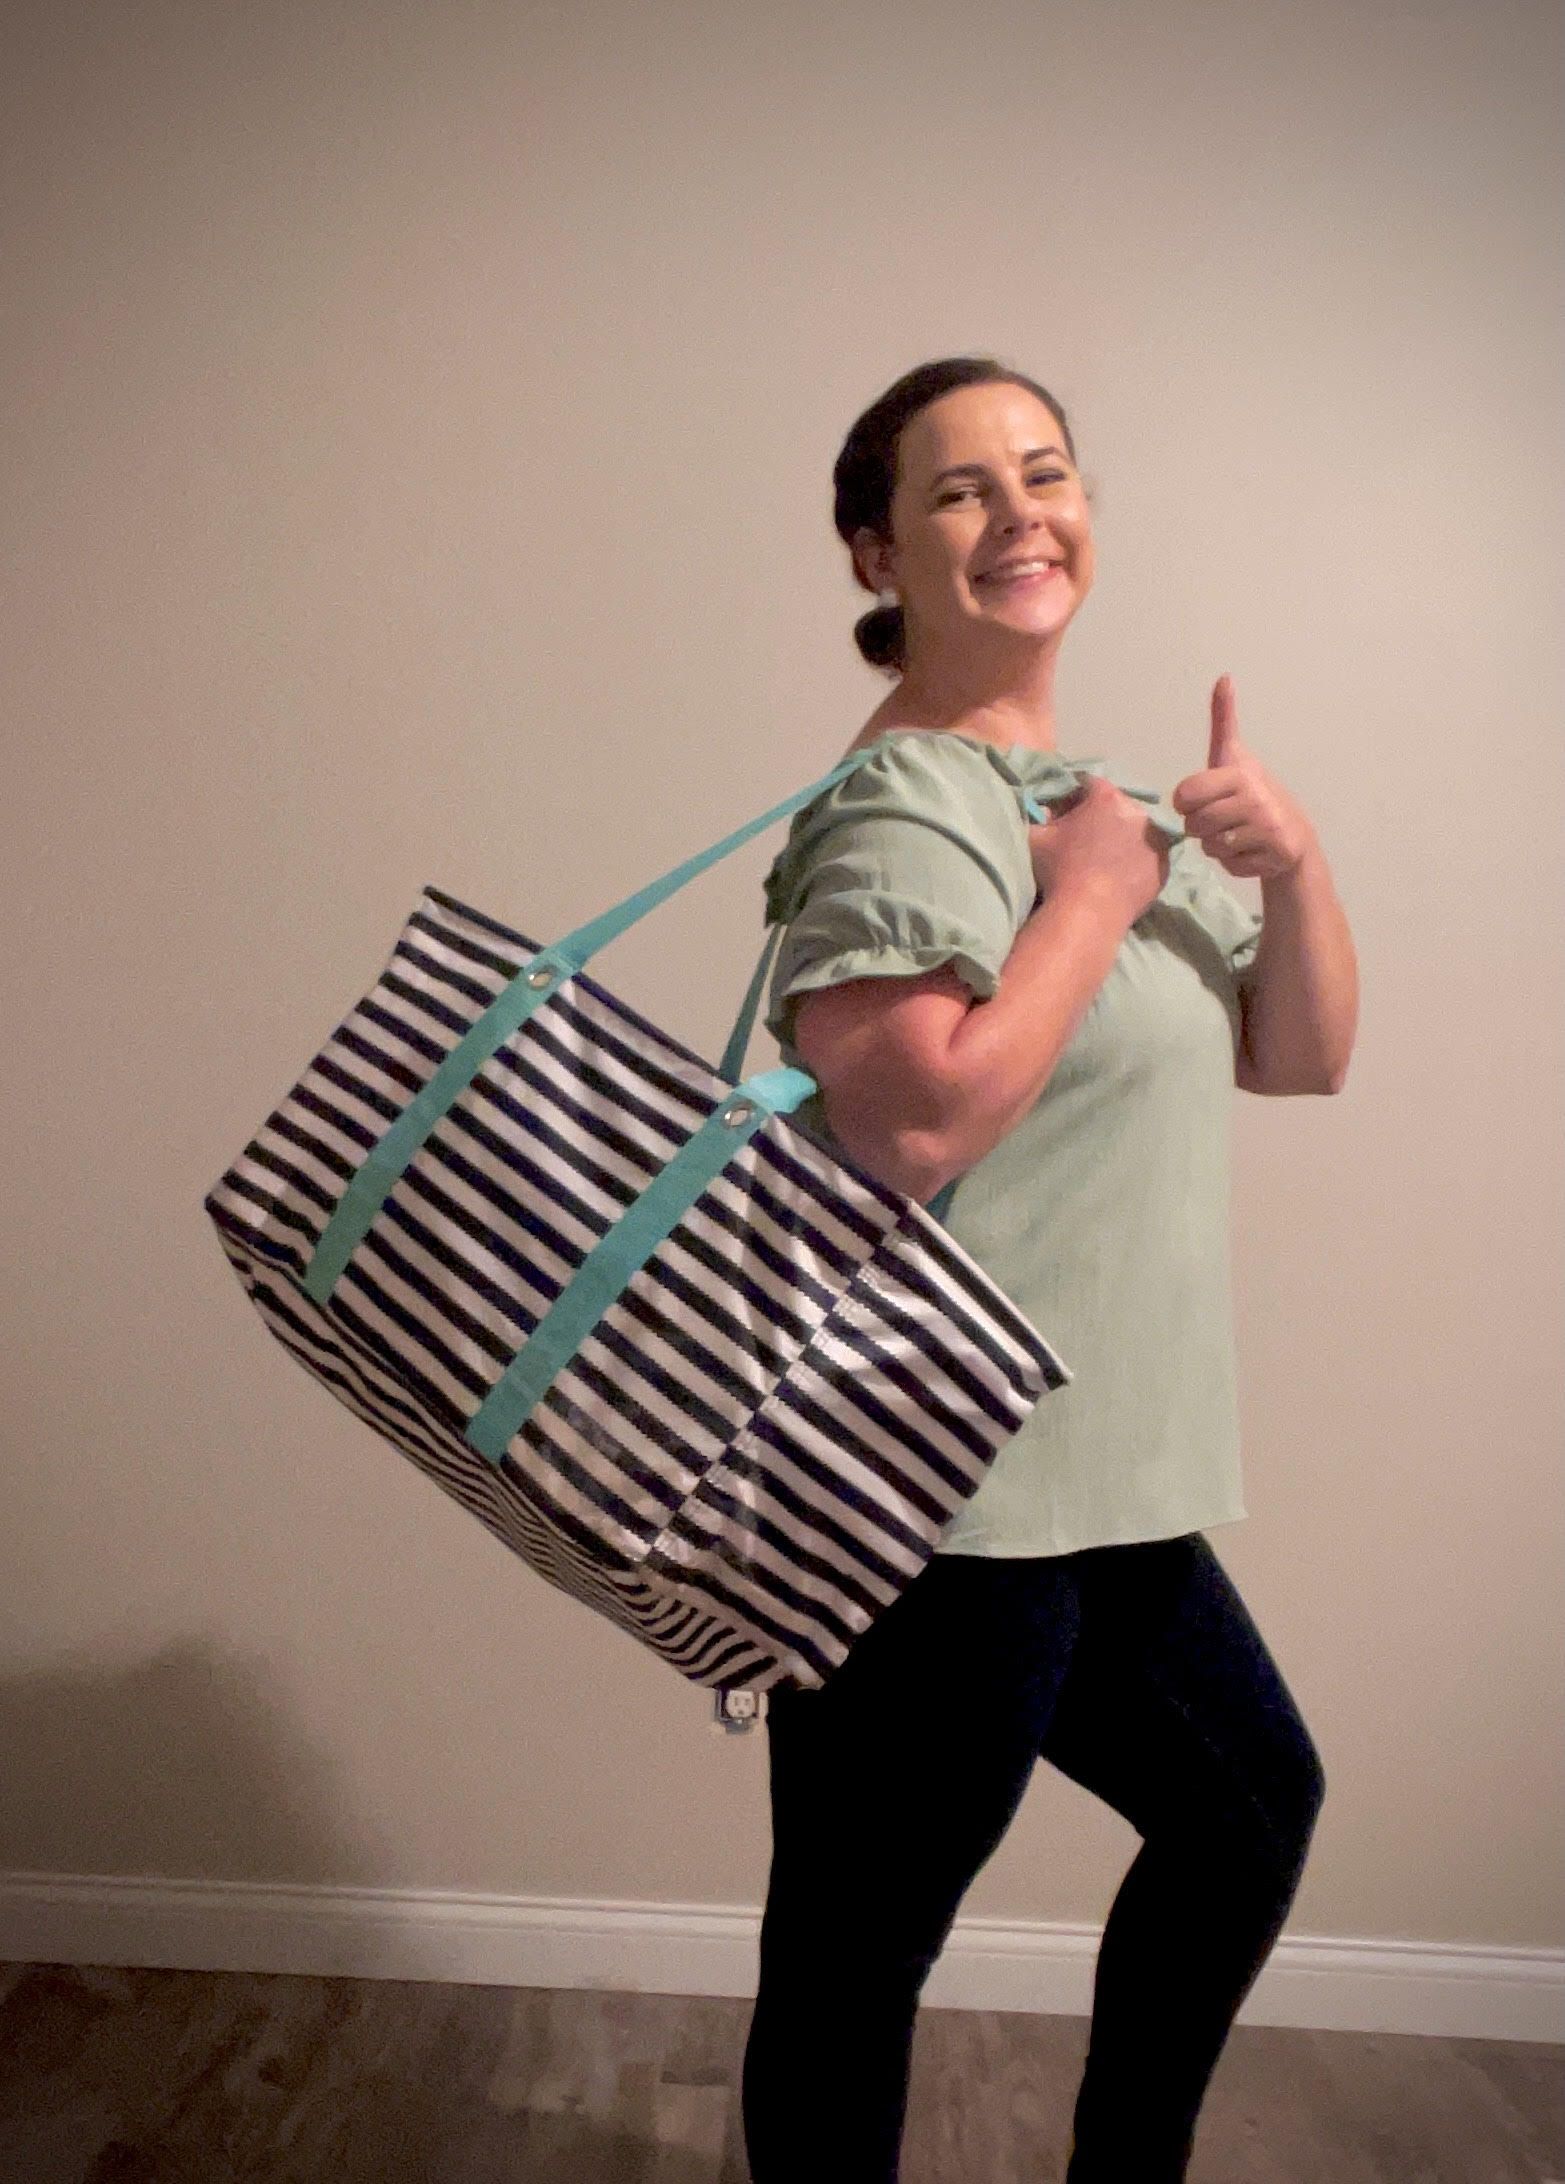 A woman is holding a striped tote bag and giving a thumbs up.